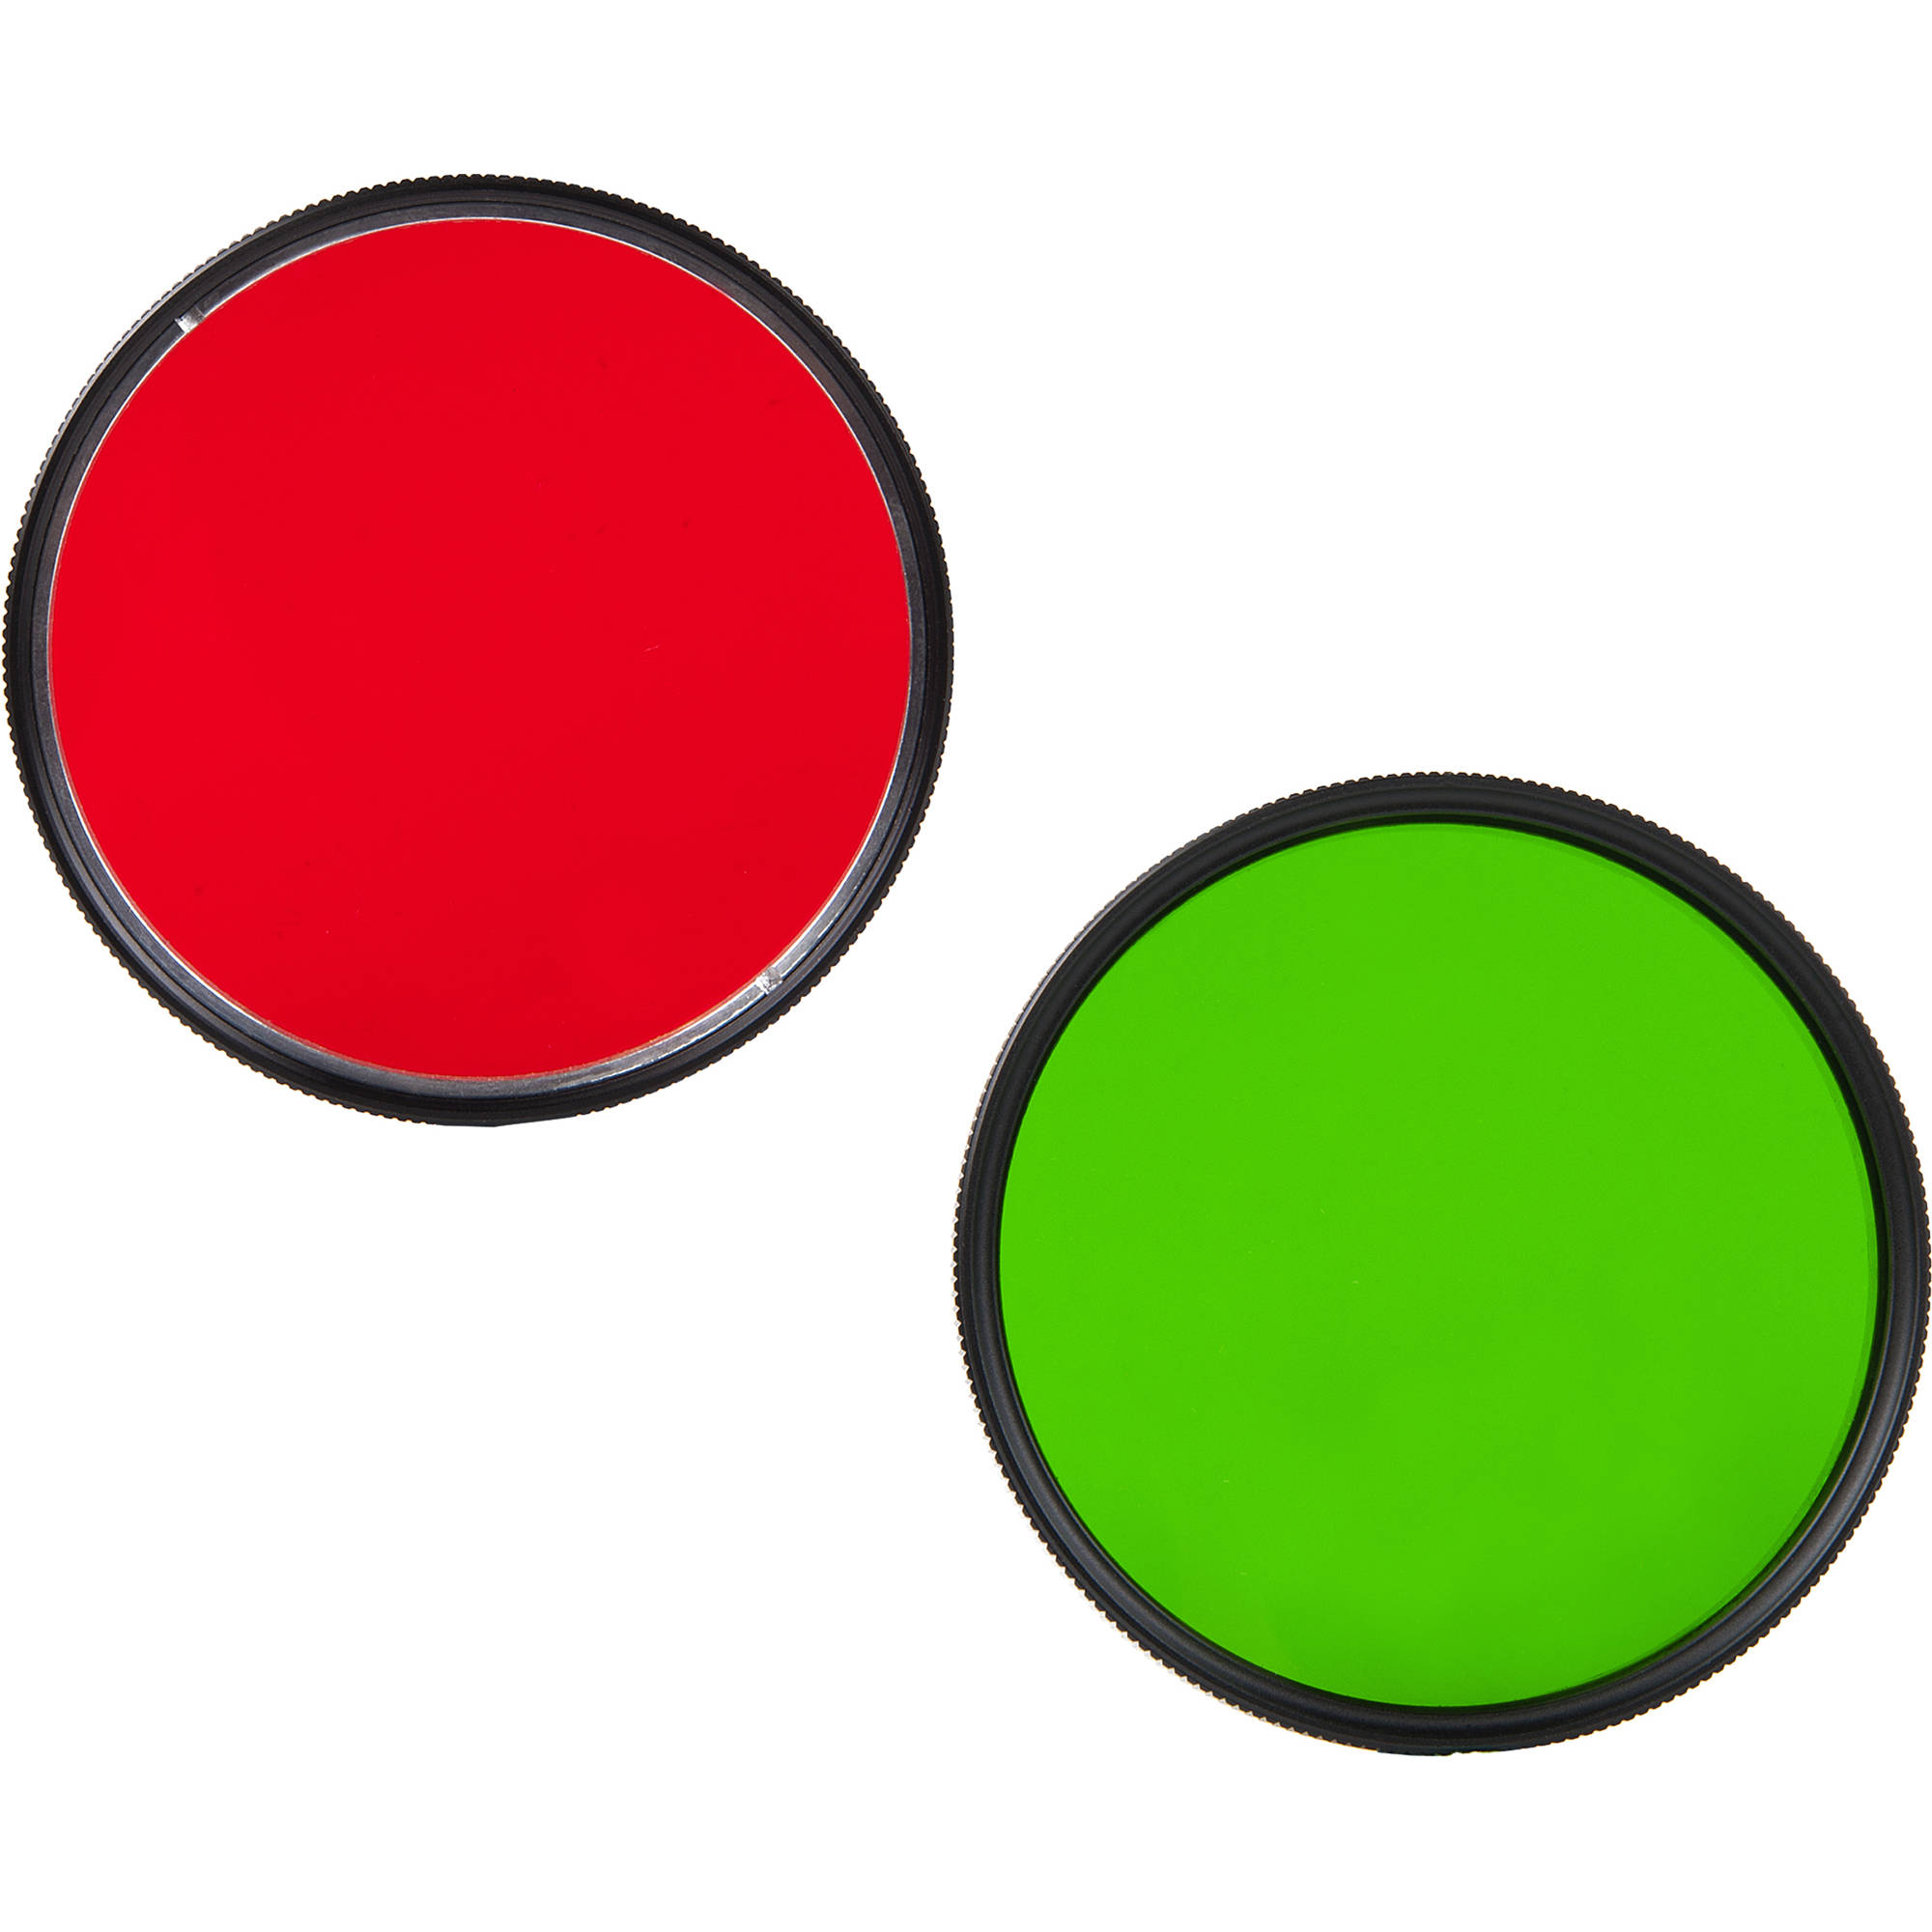 Red and Green filters: